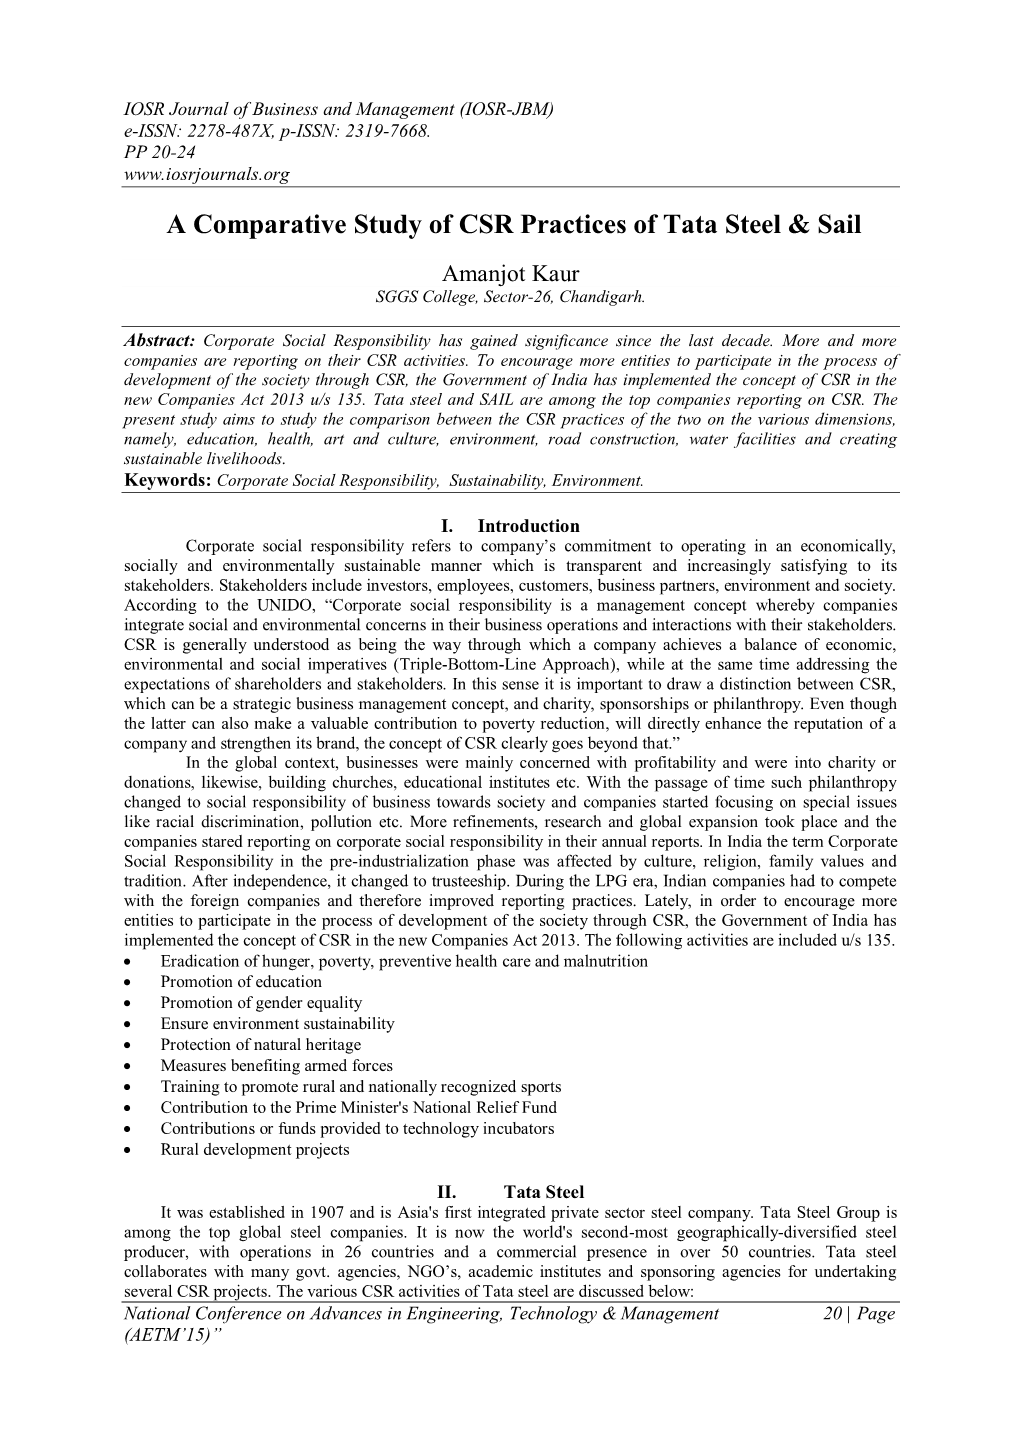 A Comparative Study of CSR Practices of Tata Steel & Sail